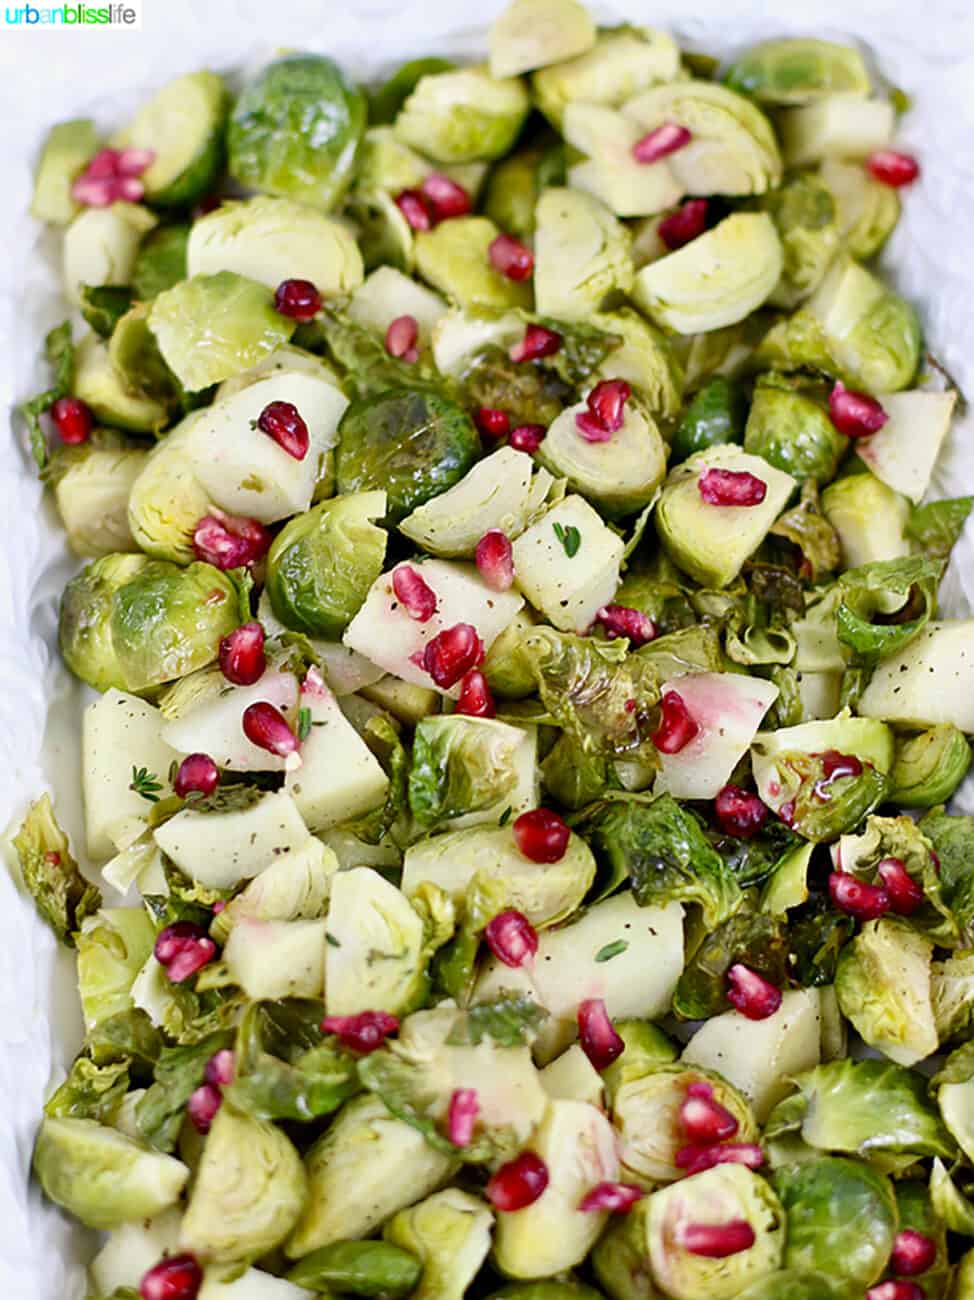 Roasted brussels sprouts with apples and pomegranate, recipe on UrbanBlissLife.com